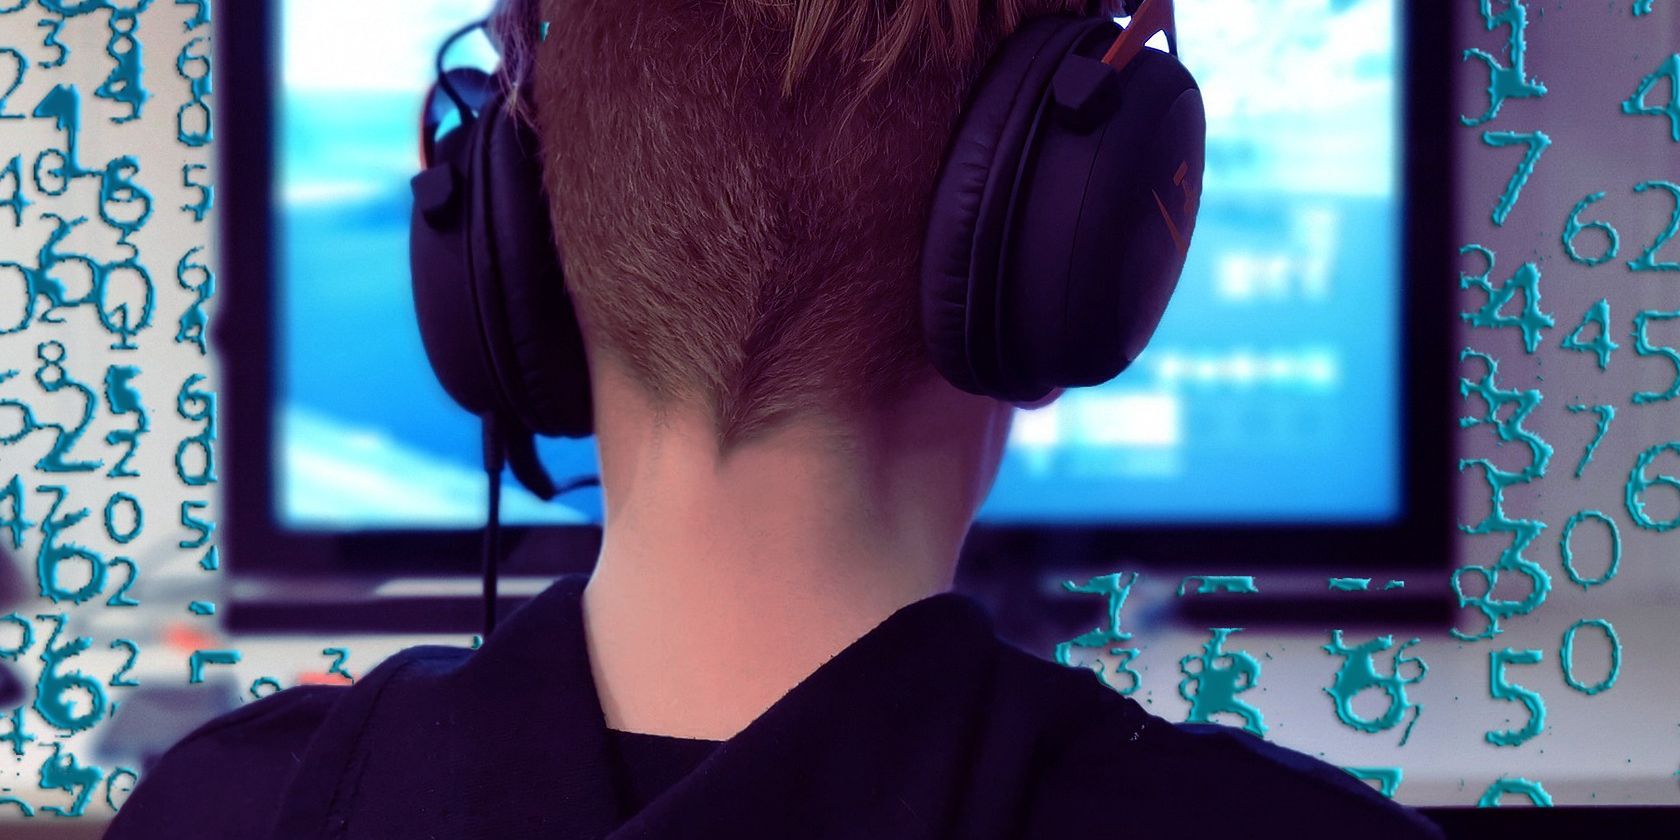 Gamers Playing on His Computer While Listening With Headphones